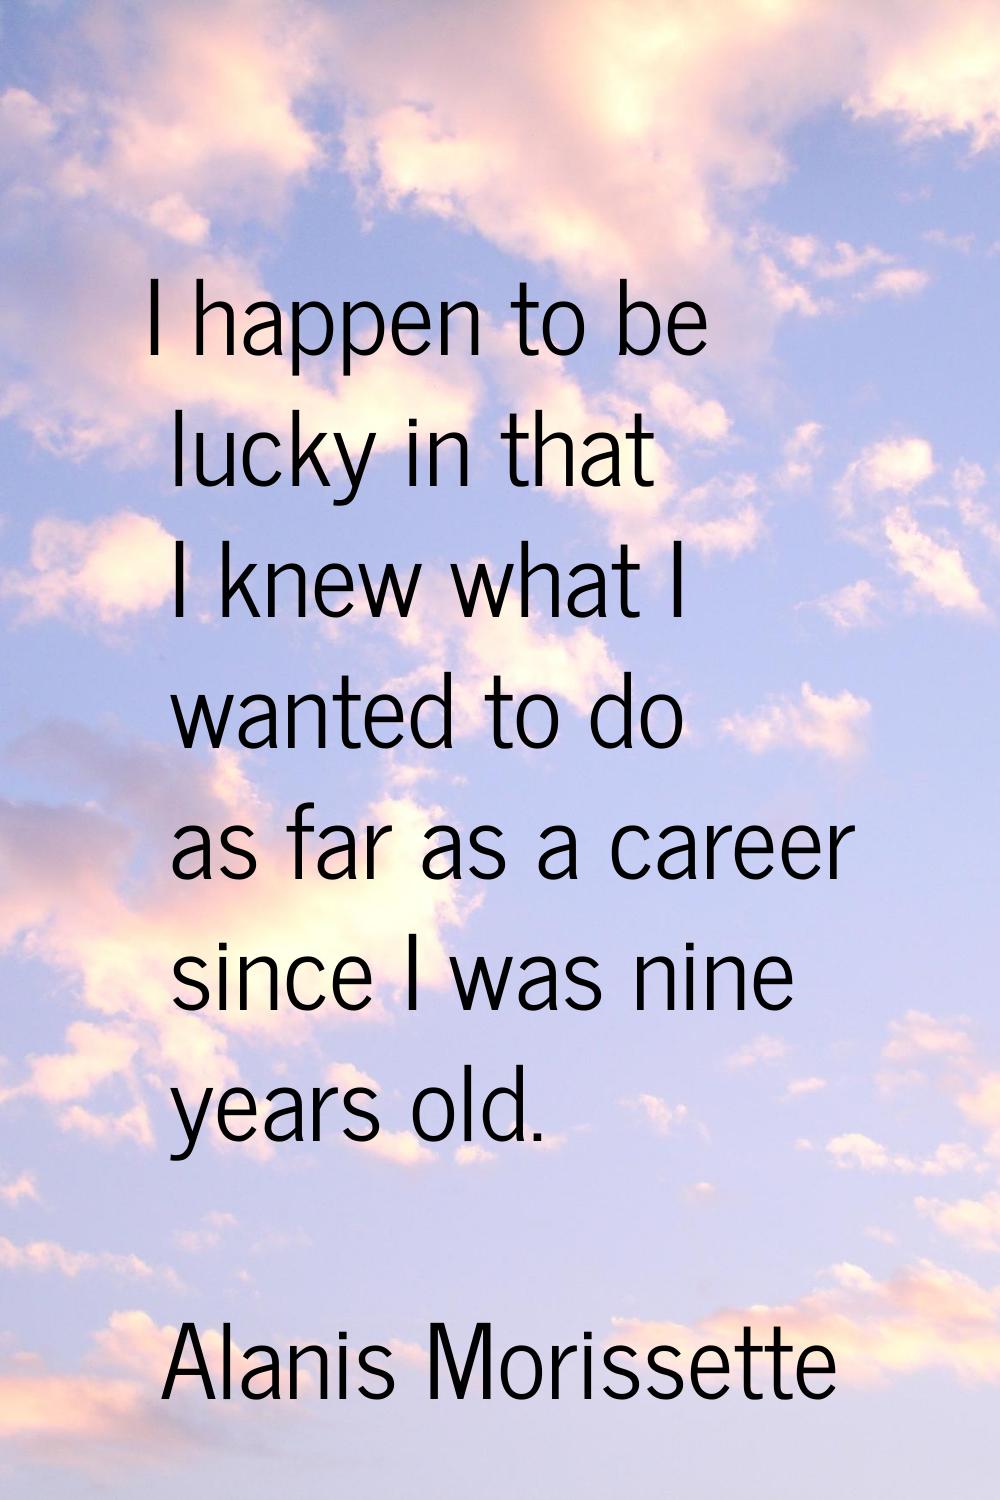 I happen to be lucky in that I knew what I wanted to do as far as a career since I was nine years o